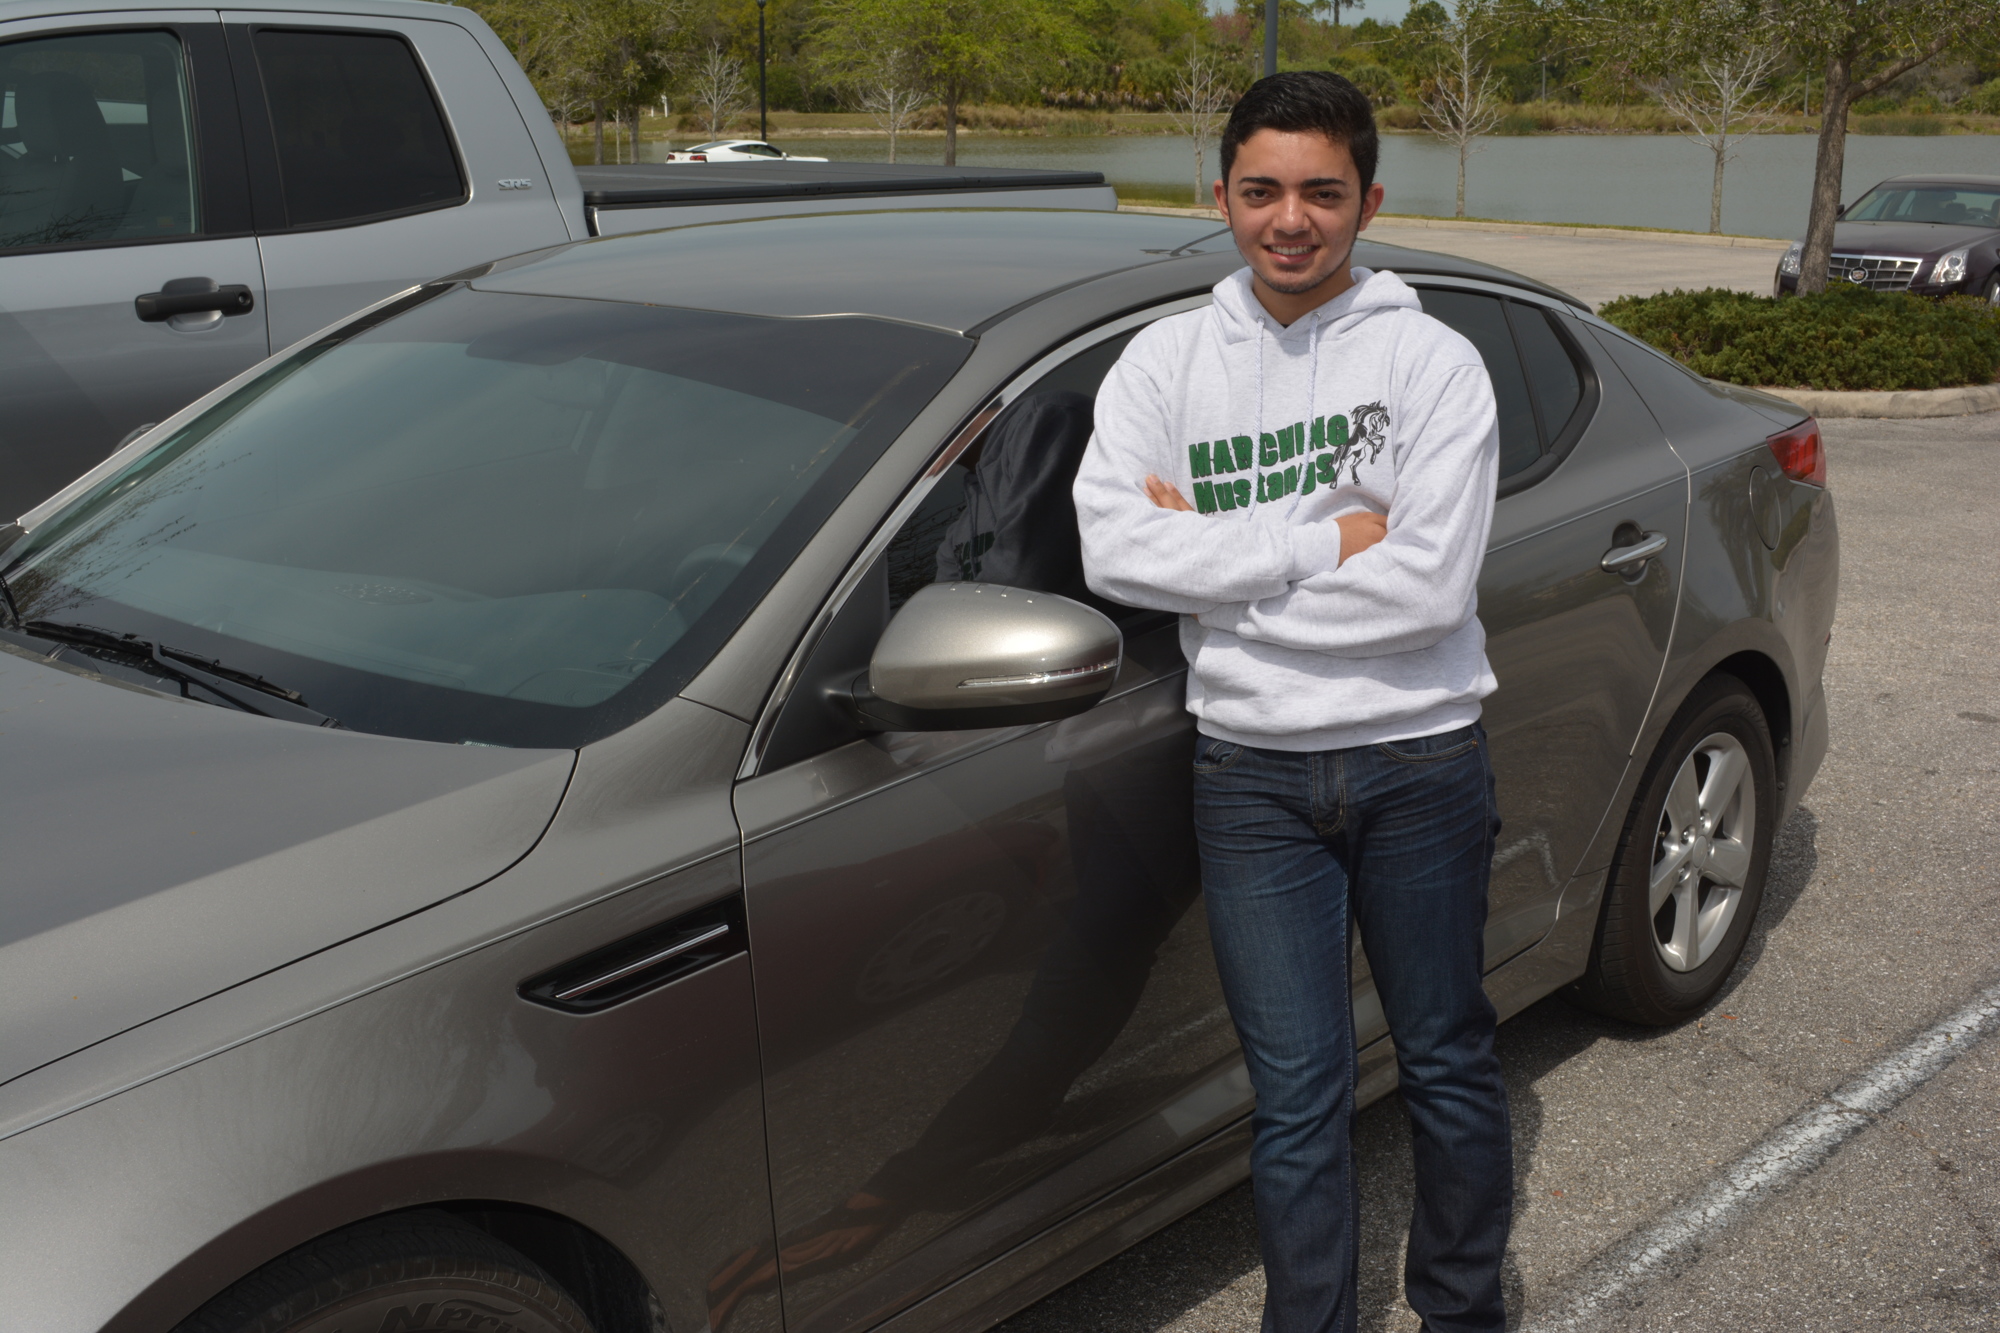 Lakewood Ranch junior Aidan Kelly, who is training for his driver's license, had the idea to bring BRAKES to the area.